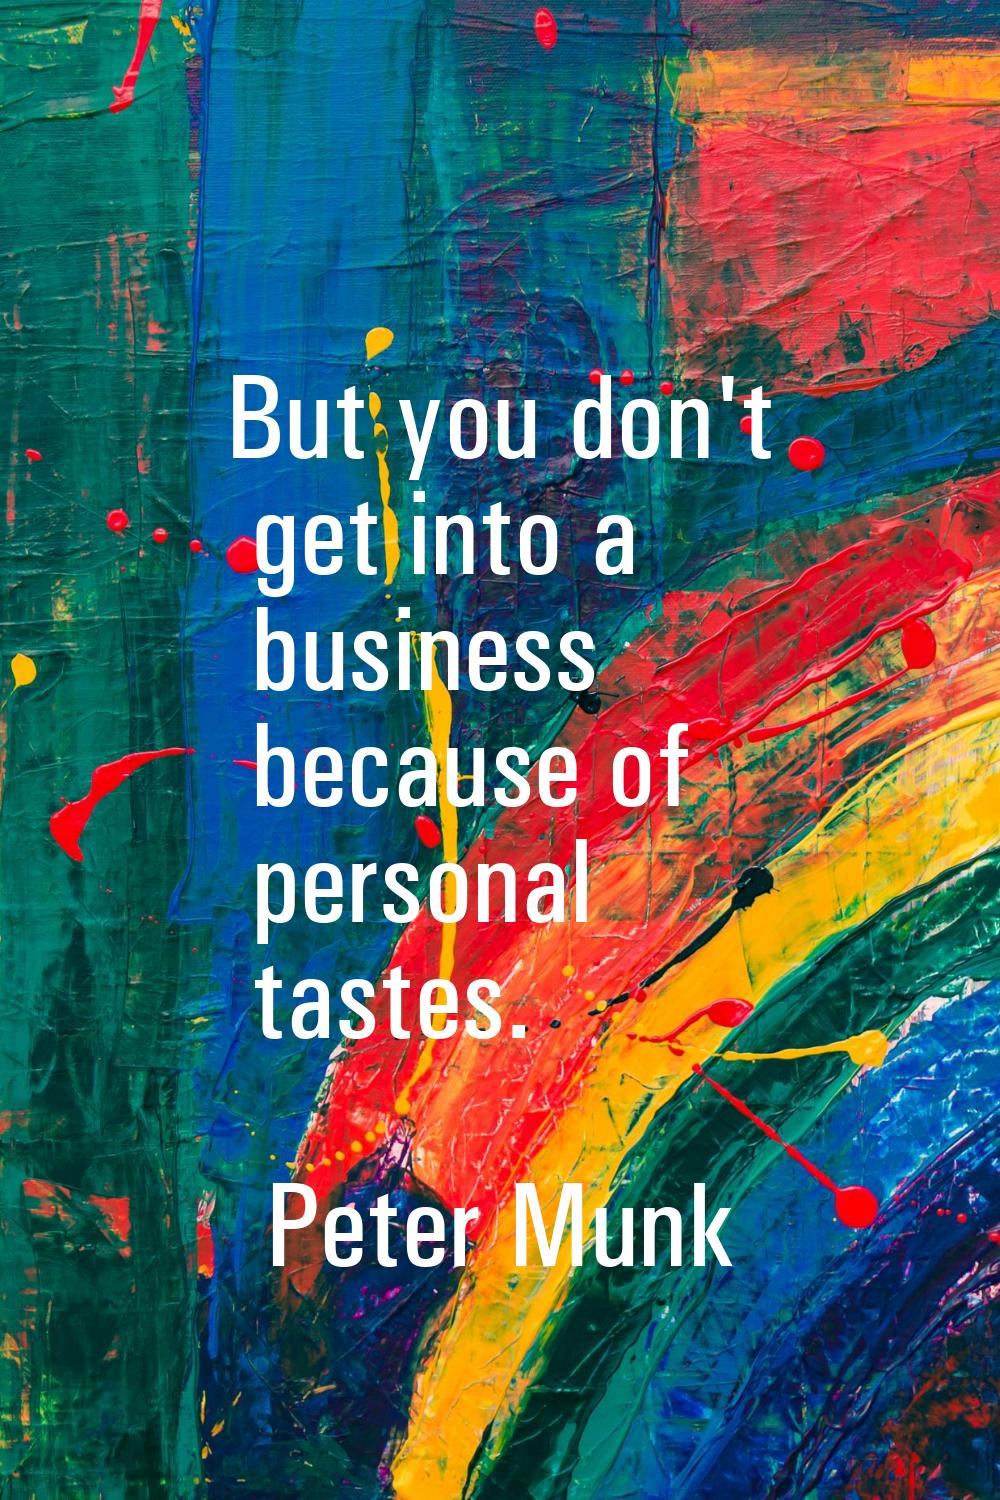 But you don't get into a business because of personal tastes.